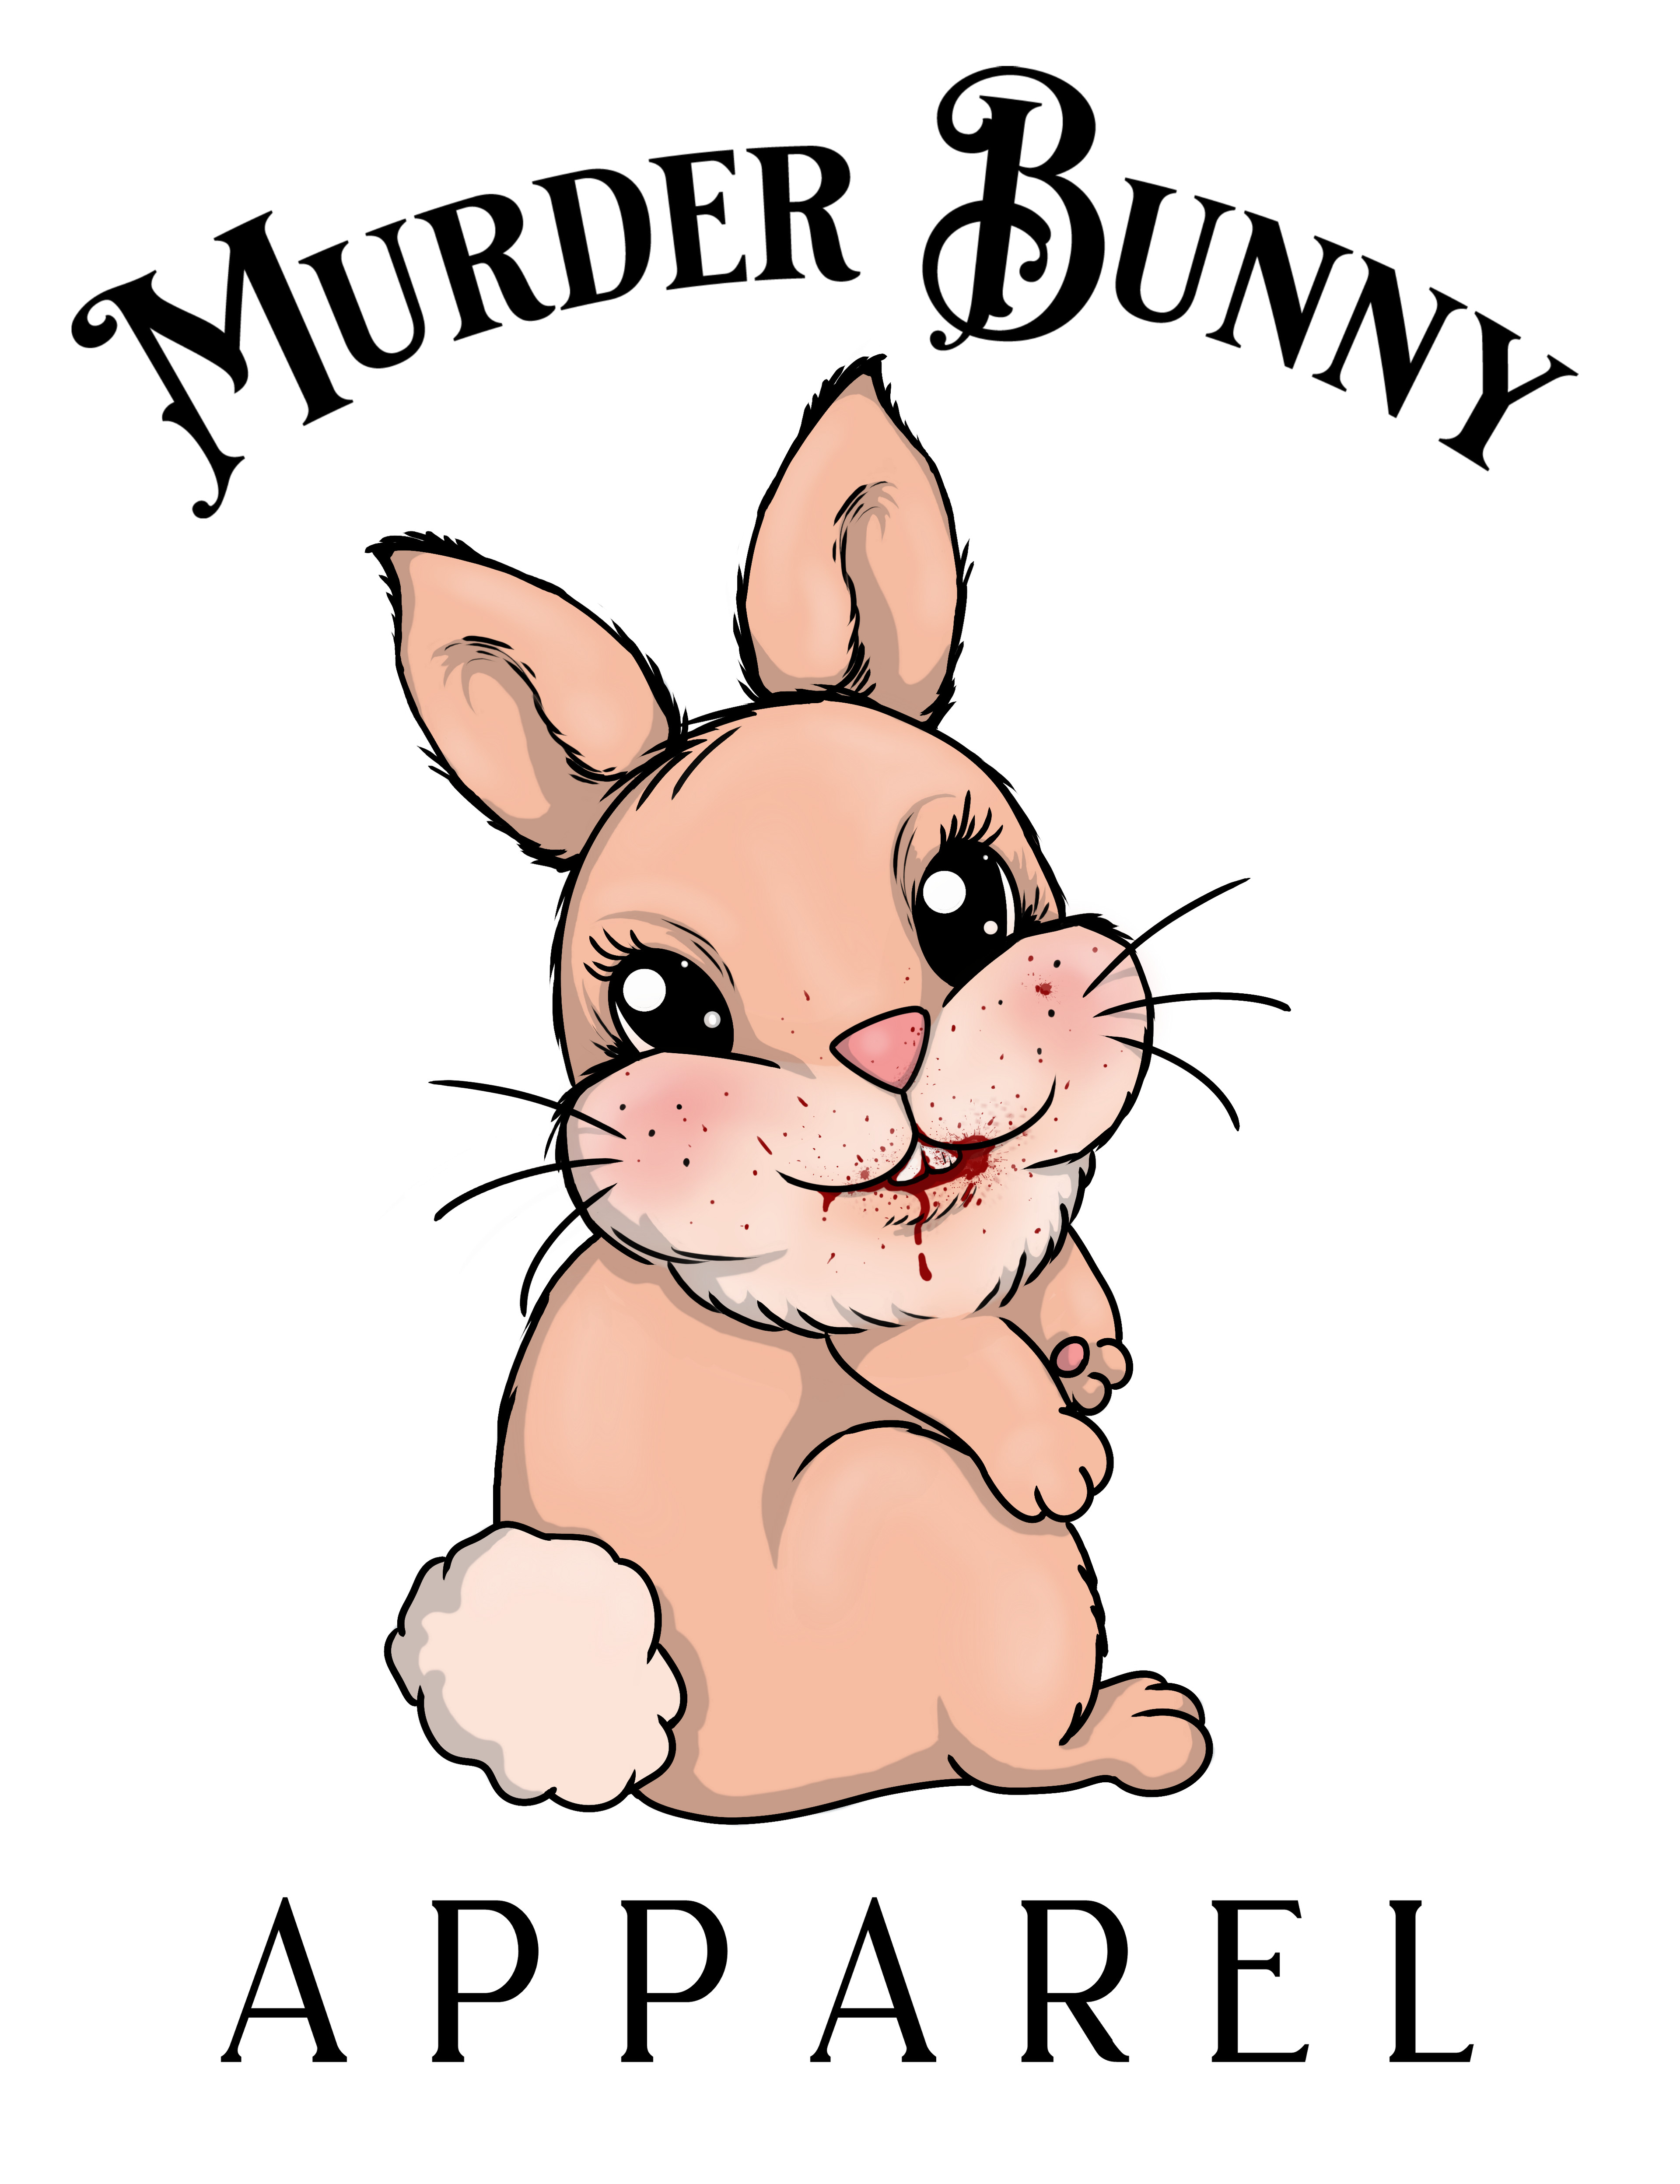 Murder Bunny Apparel logo. My wife and I created a Redbubble shop full of cute and horrible designs.  